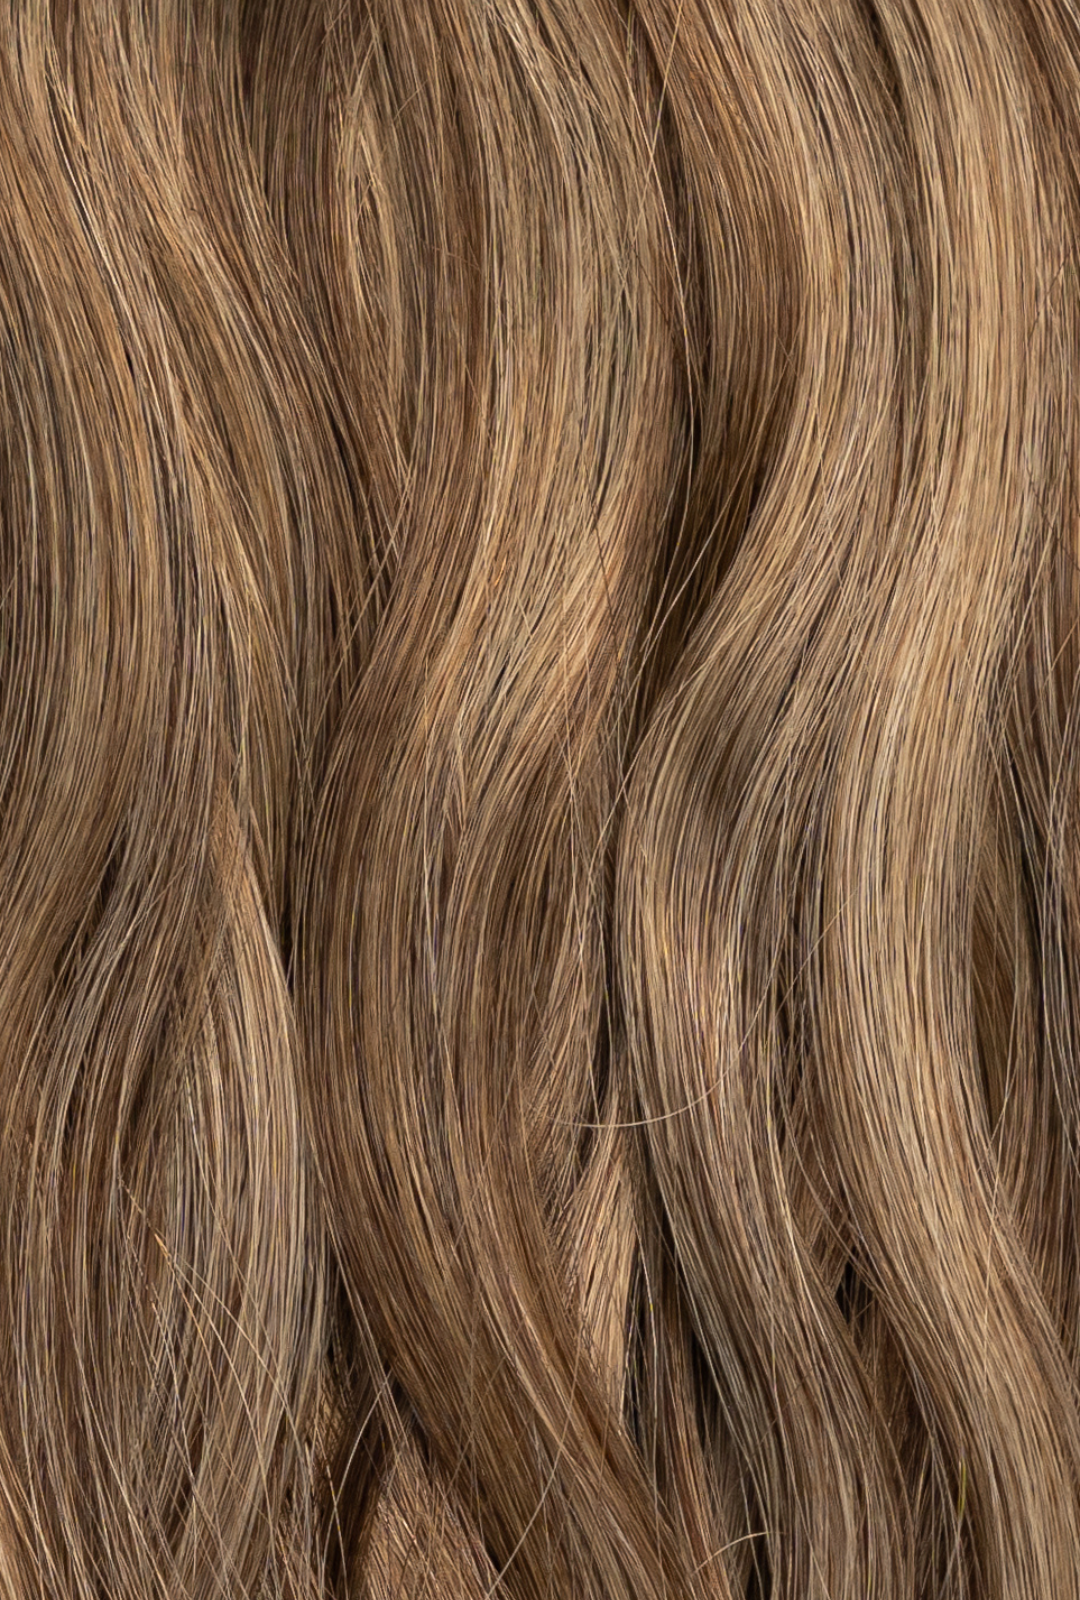 Waved by Laced Hair Machine Sewn Weft Extensions Dimensional #4/8 (Cappuccino)